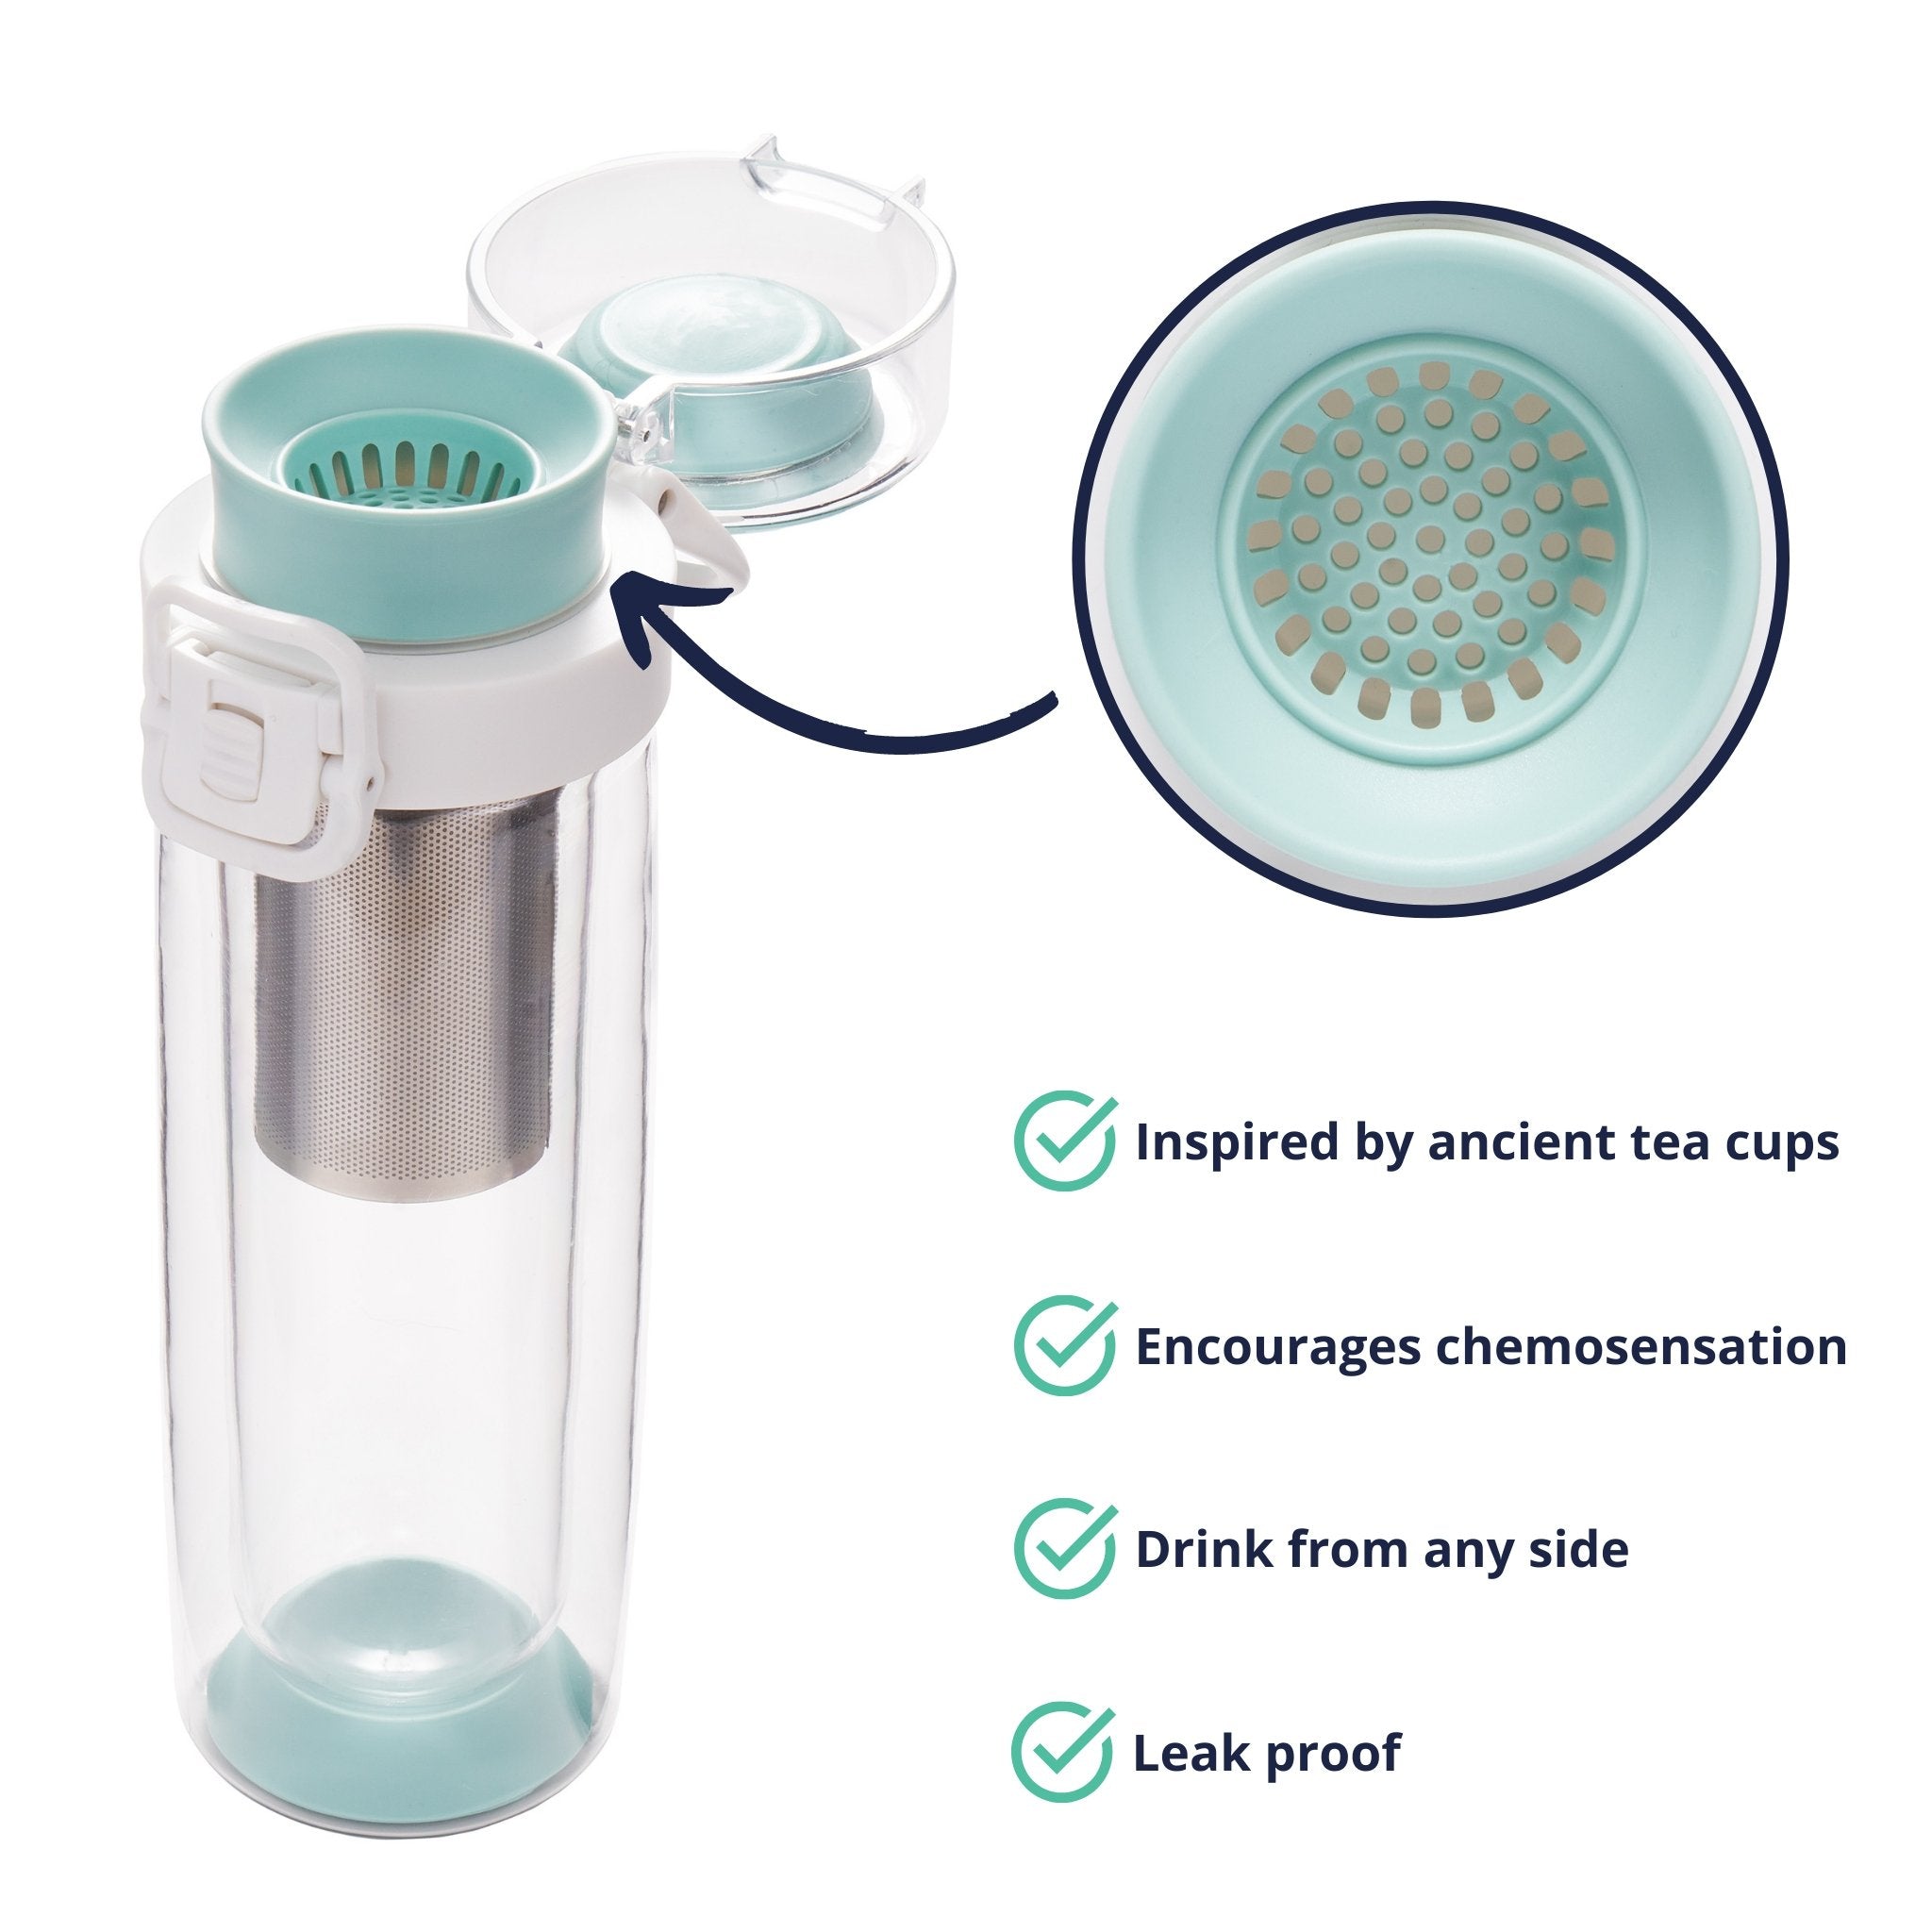 Steep & Go Cold Brew Tea Infuser from The Tea Spot - Oolong Owl